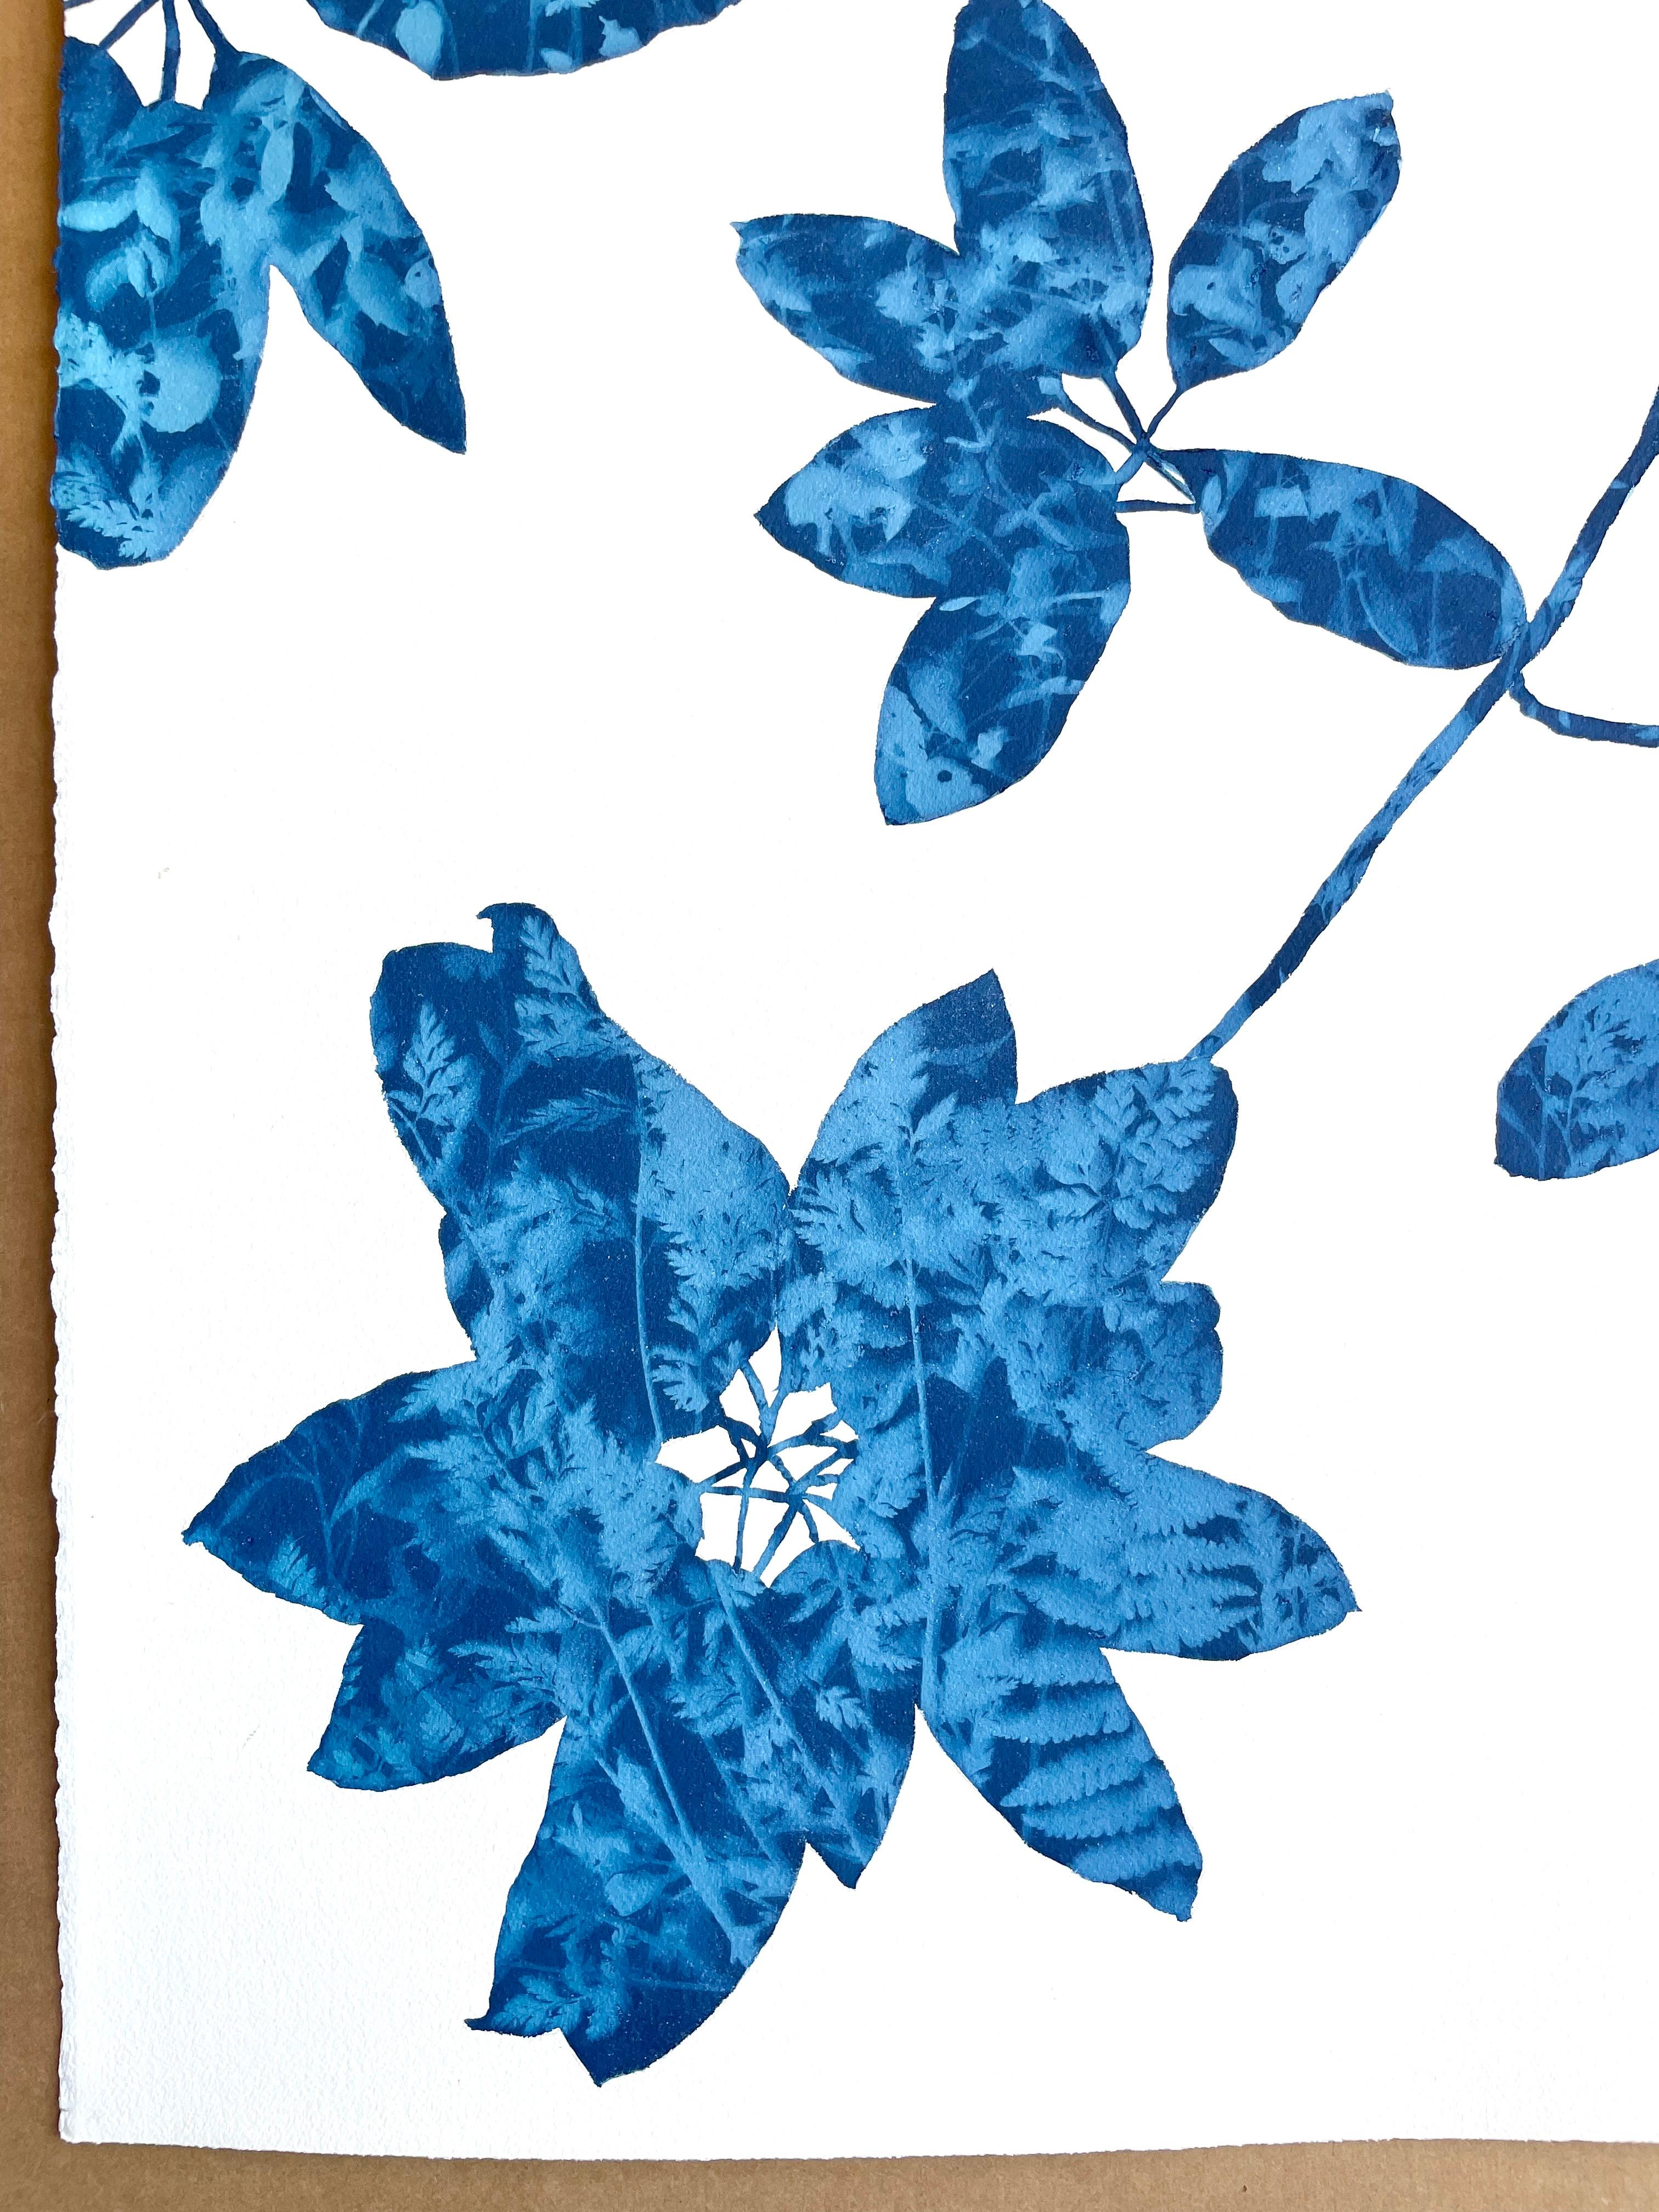 Delft Madrone II  (40 x 26 inch cyanotype painting) For Sale 4